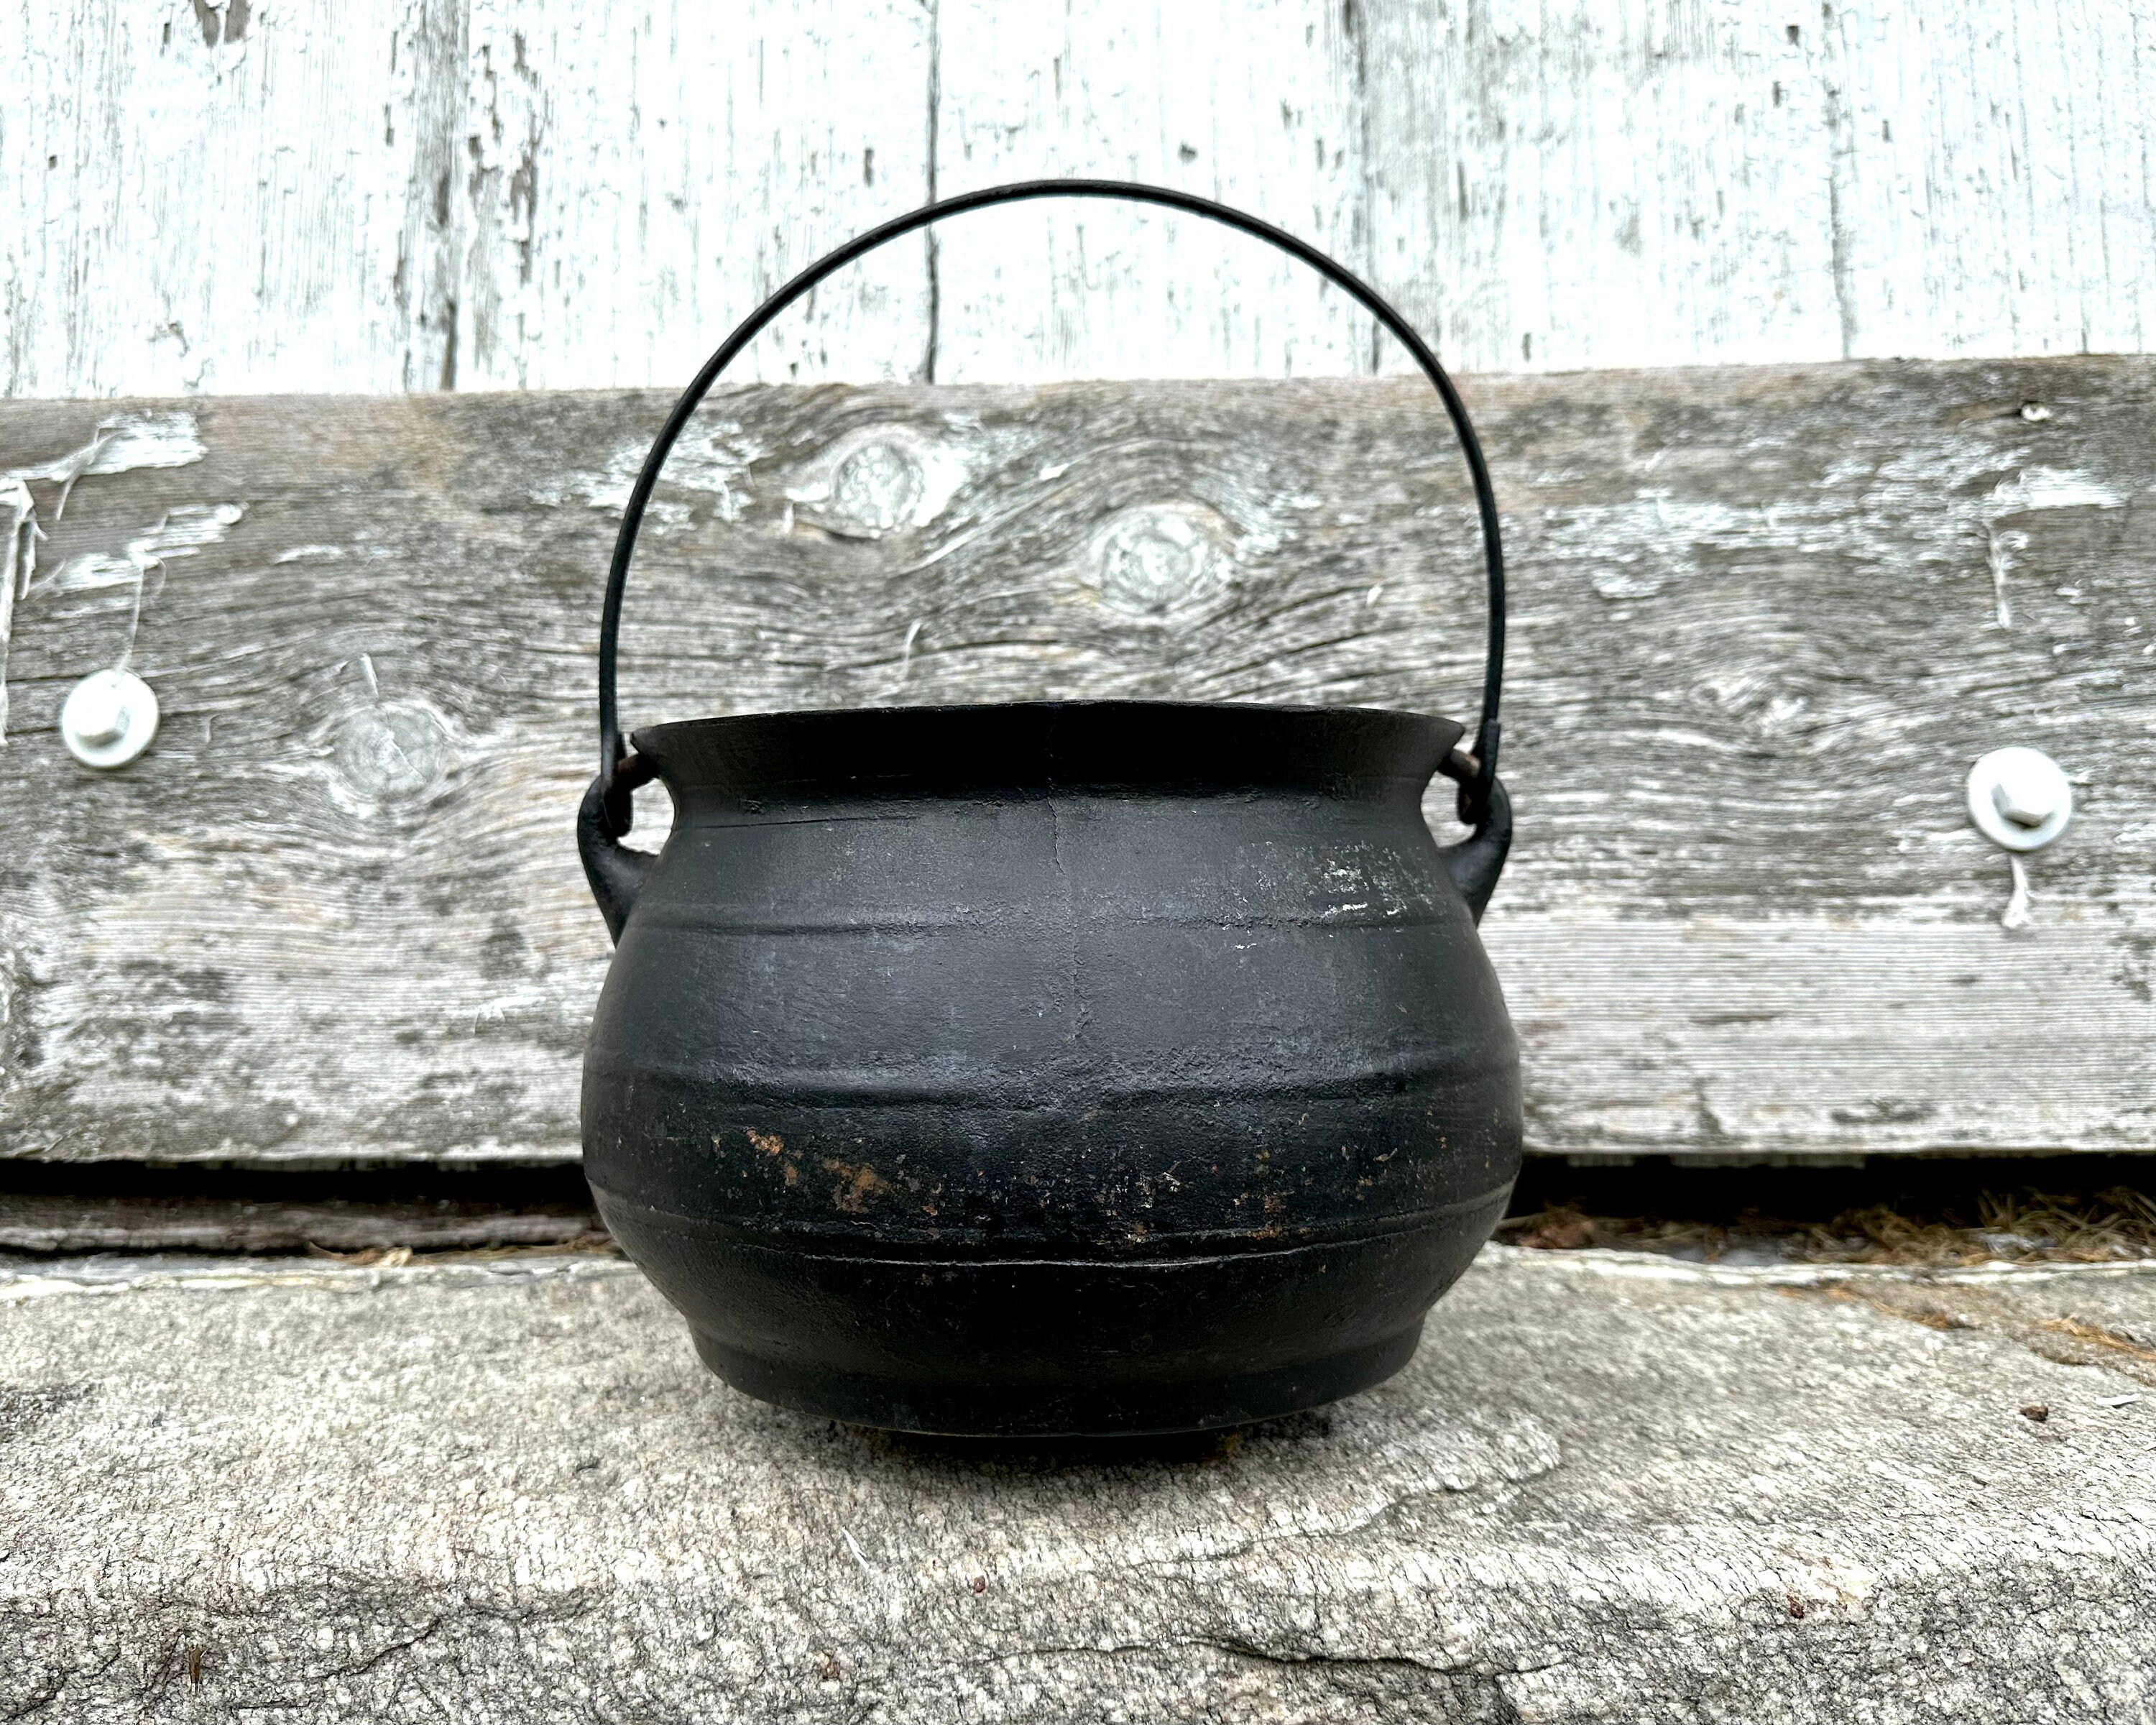 Large Antique Victorian Cast Iron Pot, 1860 for sale at Pamono